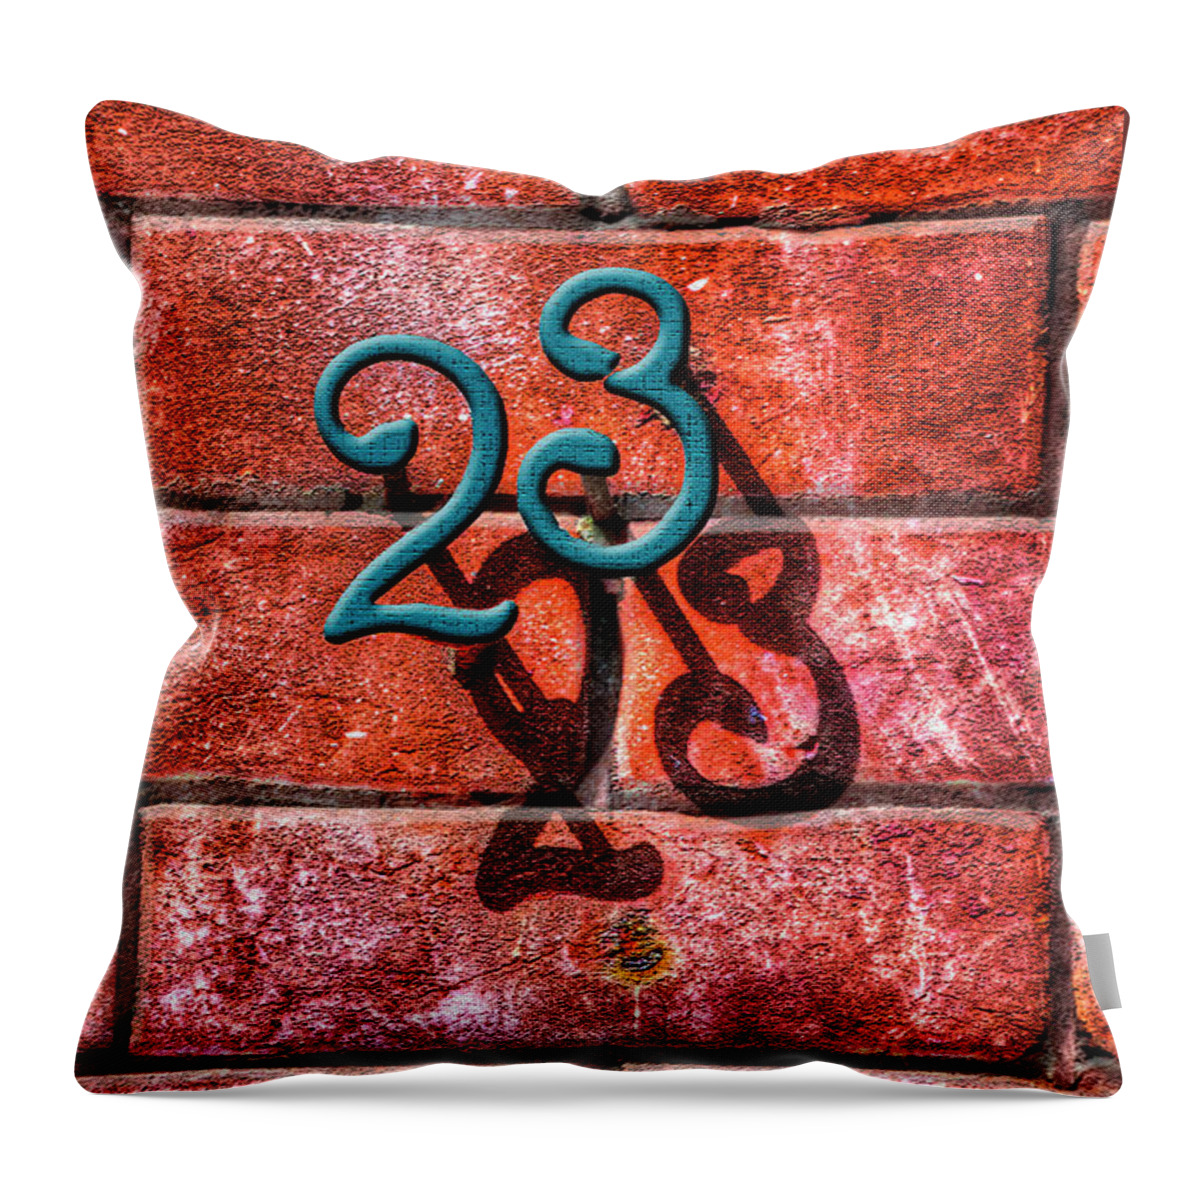 Photography Throw Pillow featuring the photograph 23 by Paul Wear